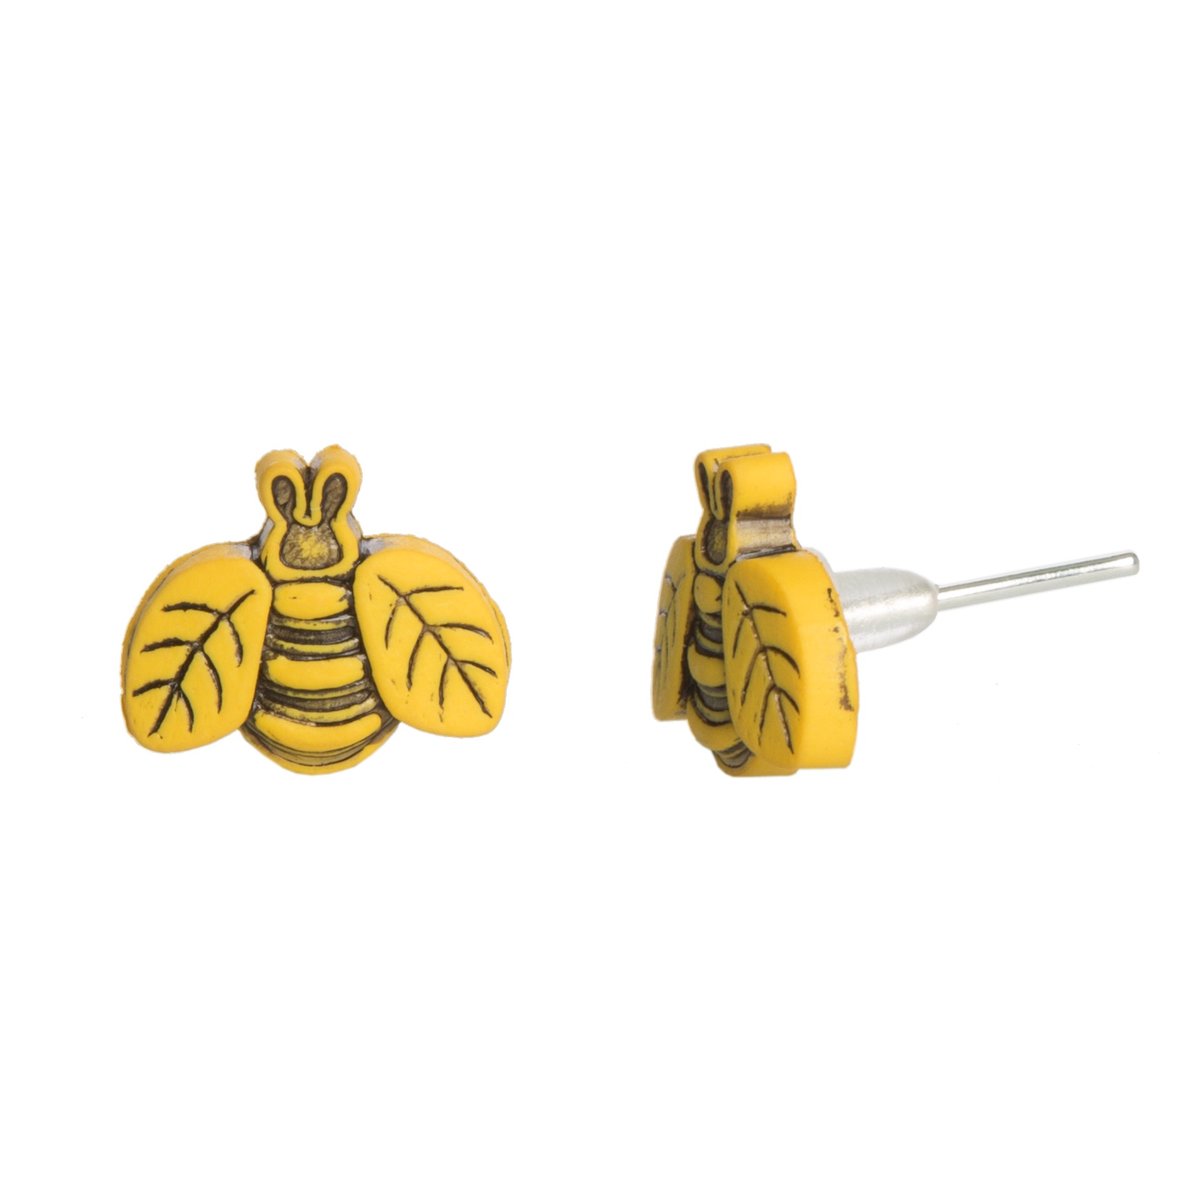 Jelly Button Jewellery — Tiny Bumble Bee Earrings